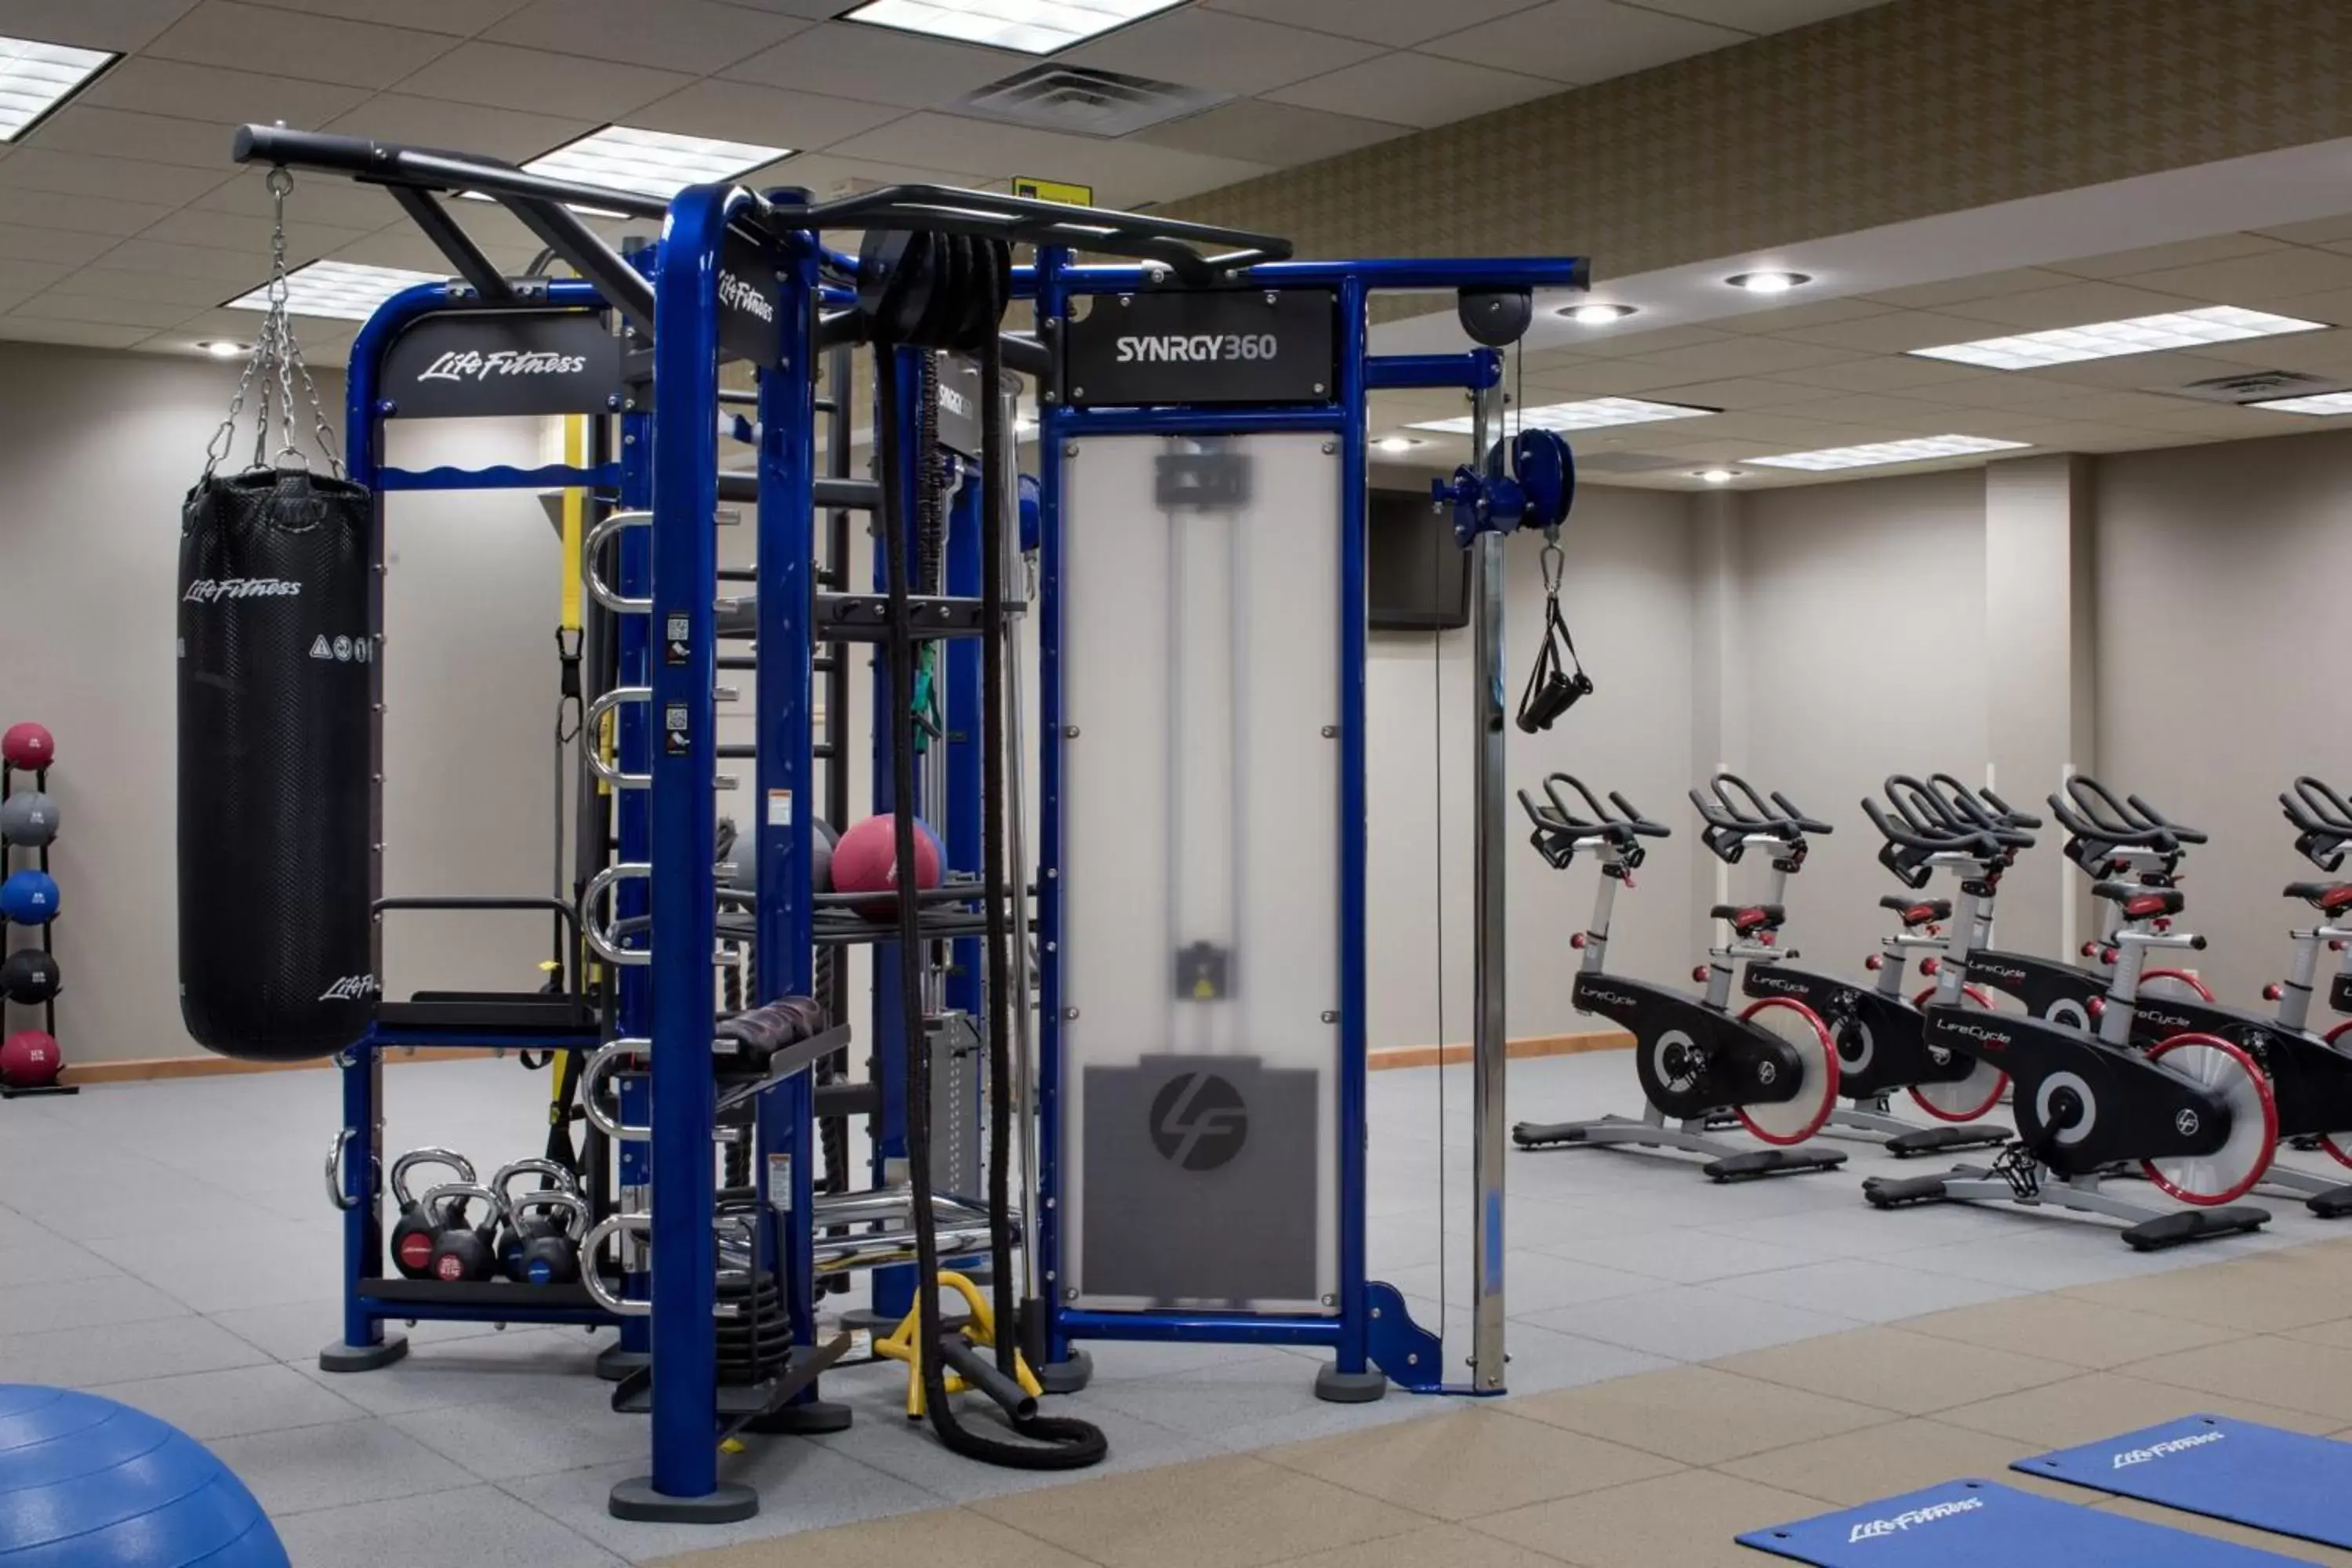 Fitness centre/facilities, Fitness Center/Facilities in Gaylord Texan Resort and Convention Center